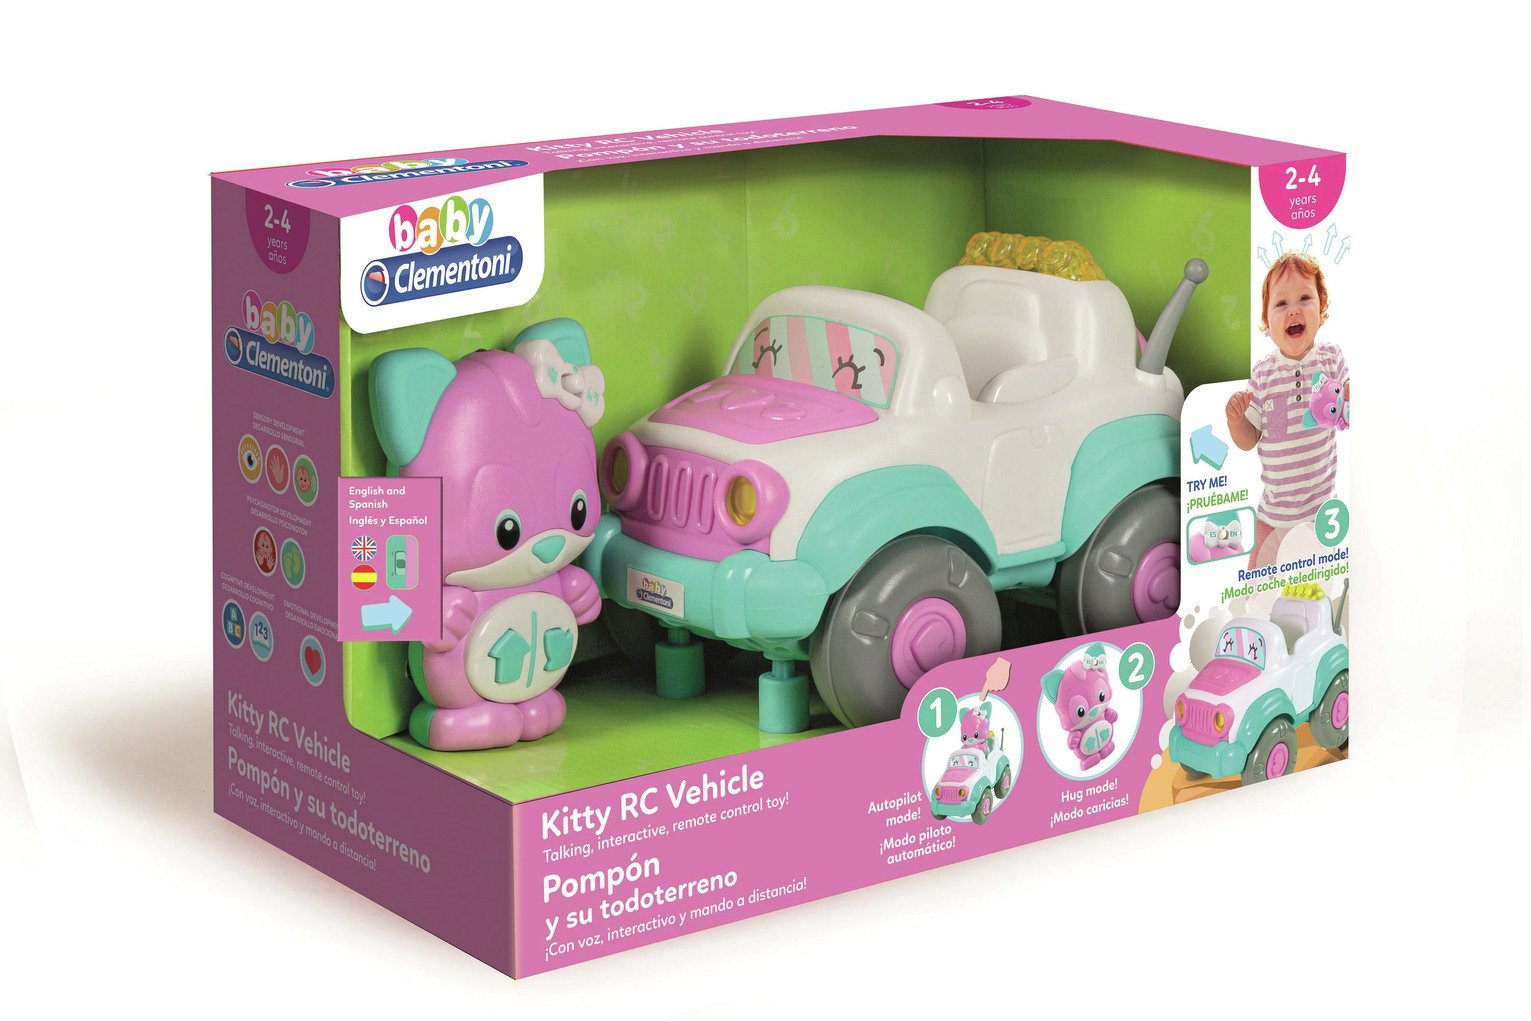 Baby Clementoni Kitty Radio Controlled Vehicle Review